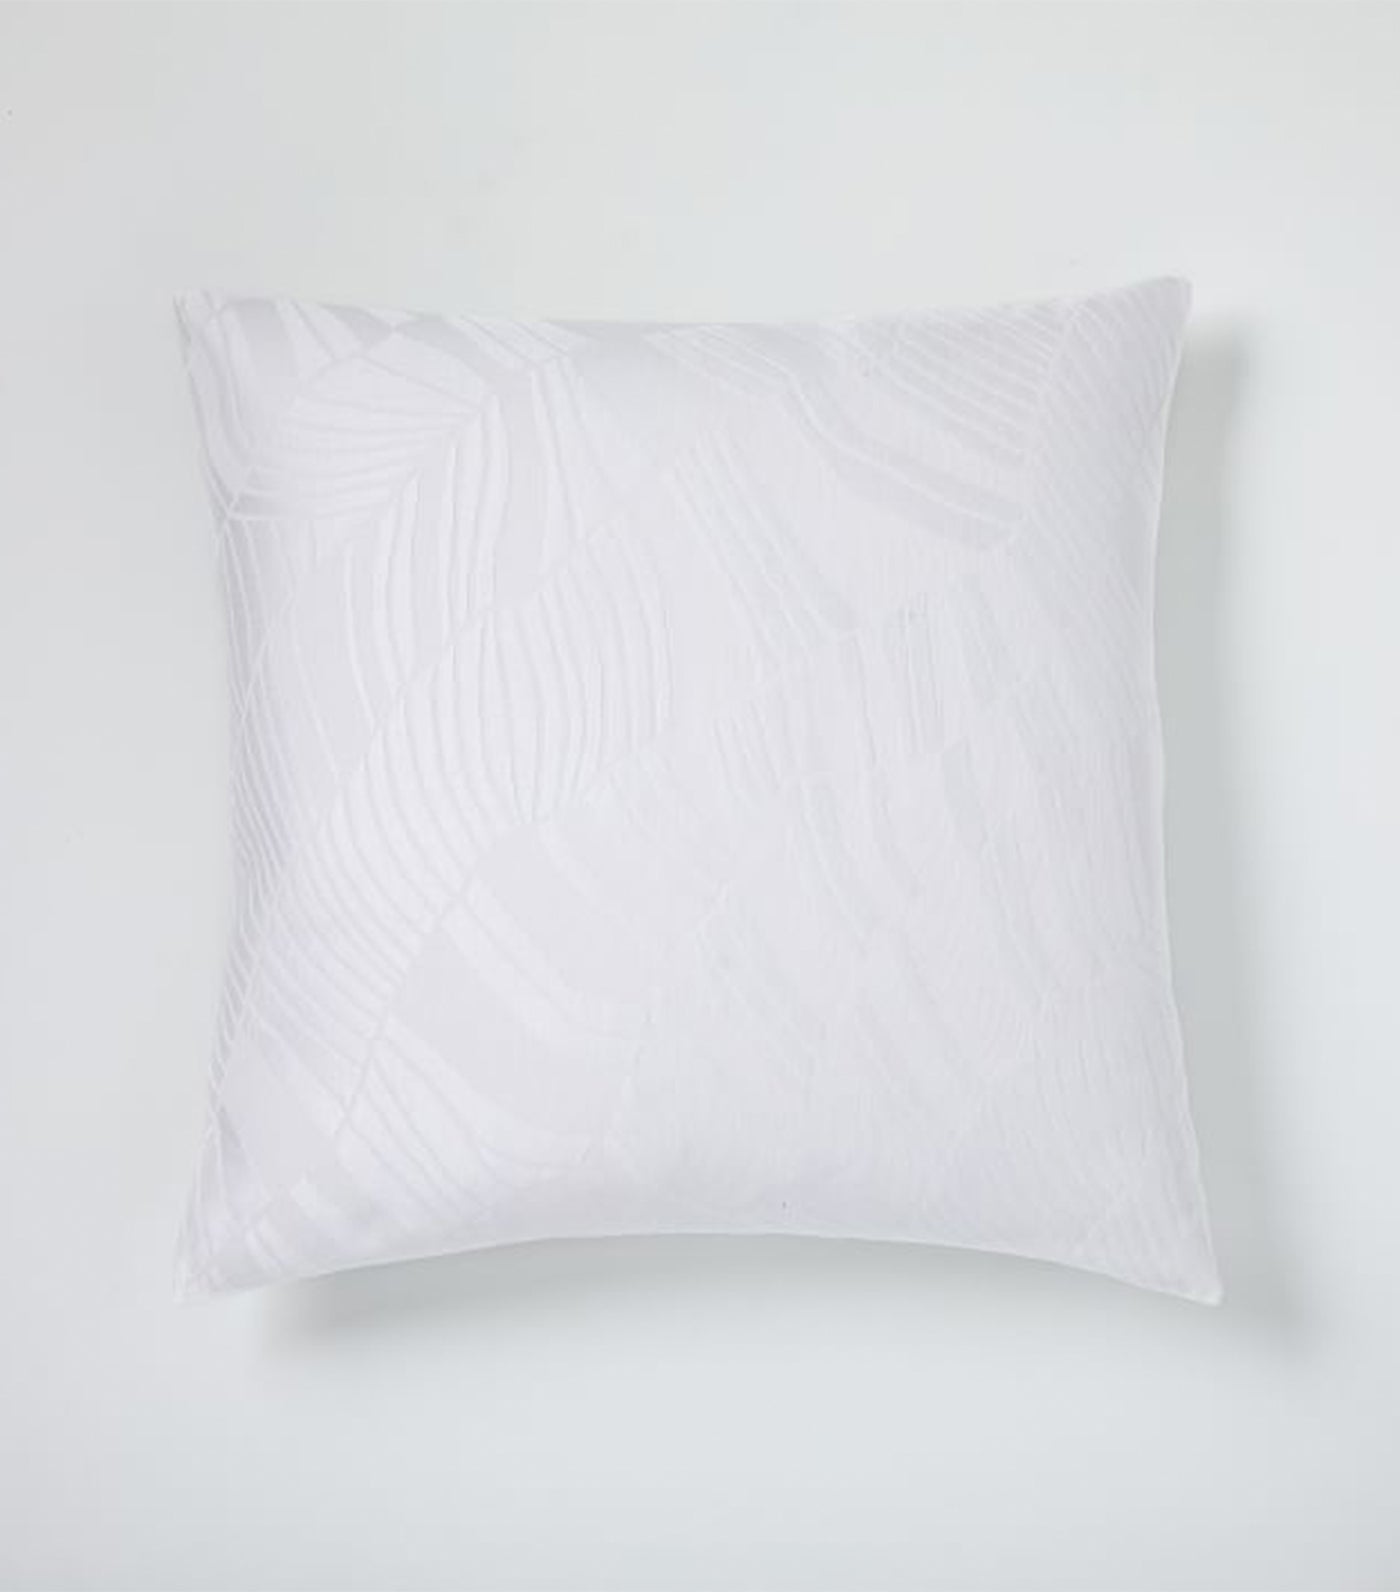 west elm stone white euro sham tencel™ and cotton matelasse rippled duvet cover and shams collection